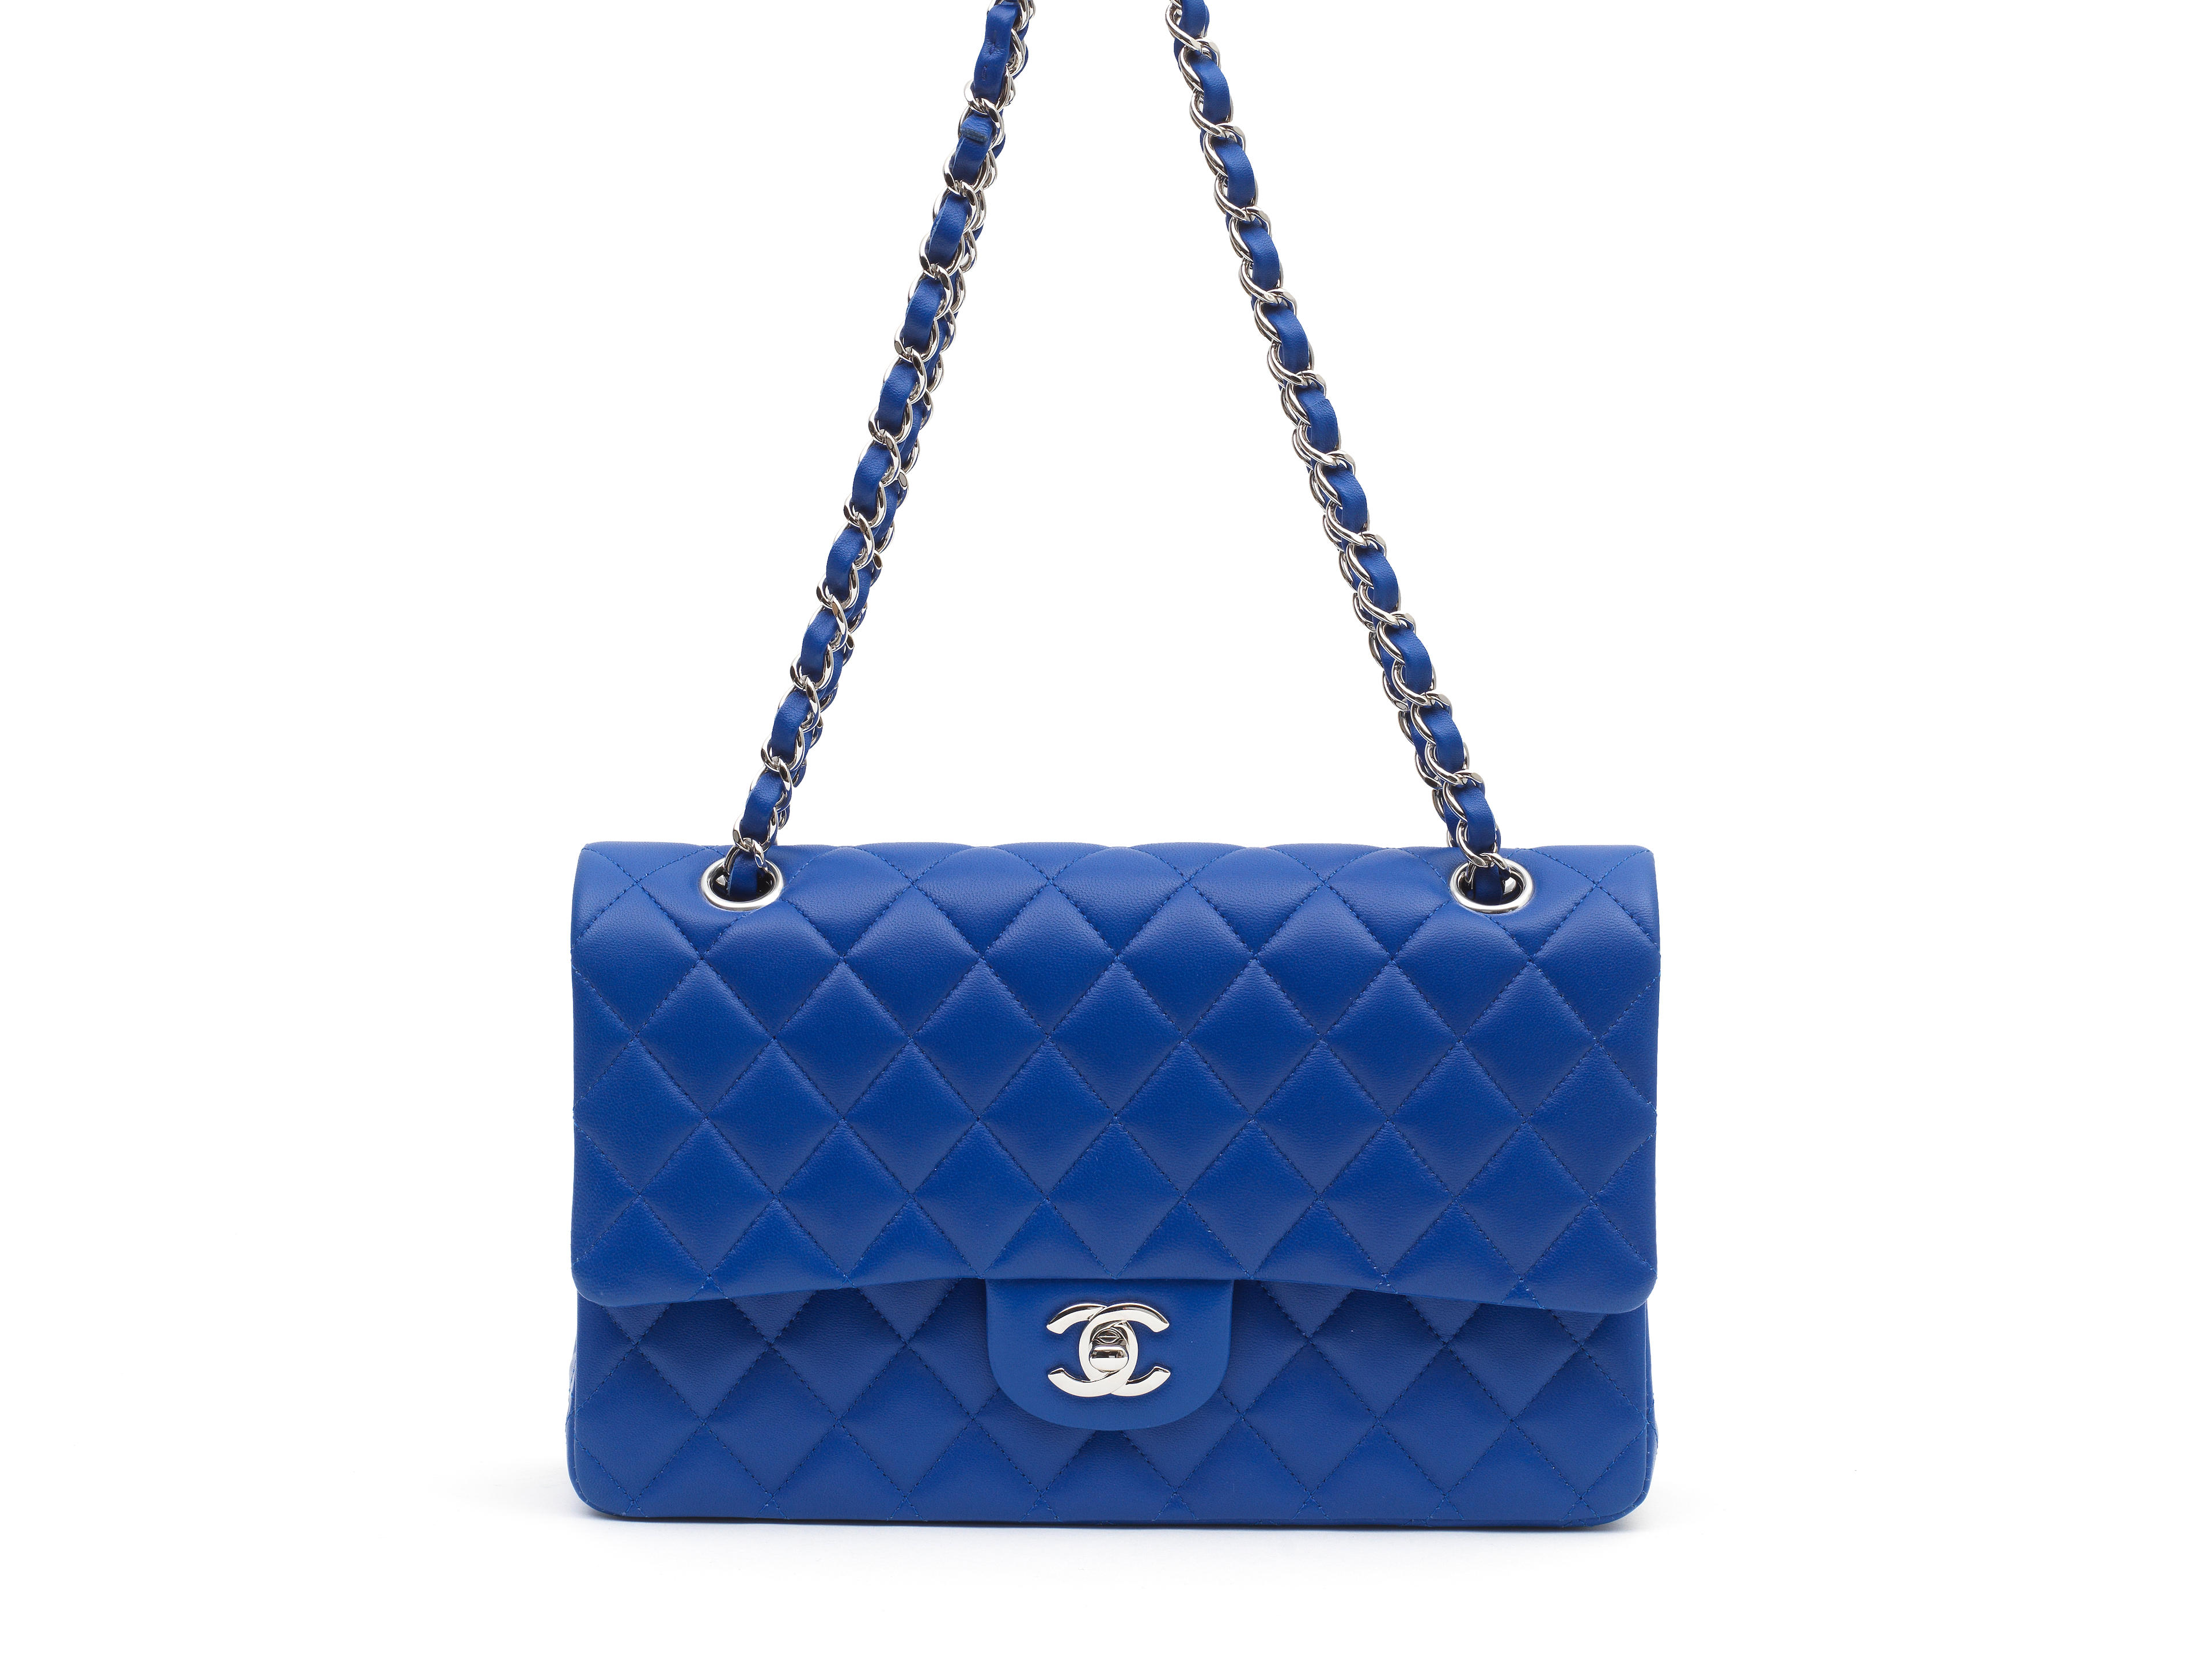 A ROYAL BLUE QUILTED LAMBSKIN CLASSIC DOUBLE FLAP Chanel, 2019 (includes serial sticker, authenticity card, felt protector, dust bag and box)